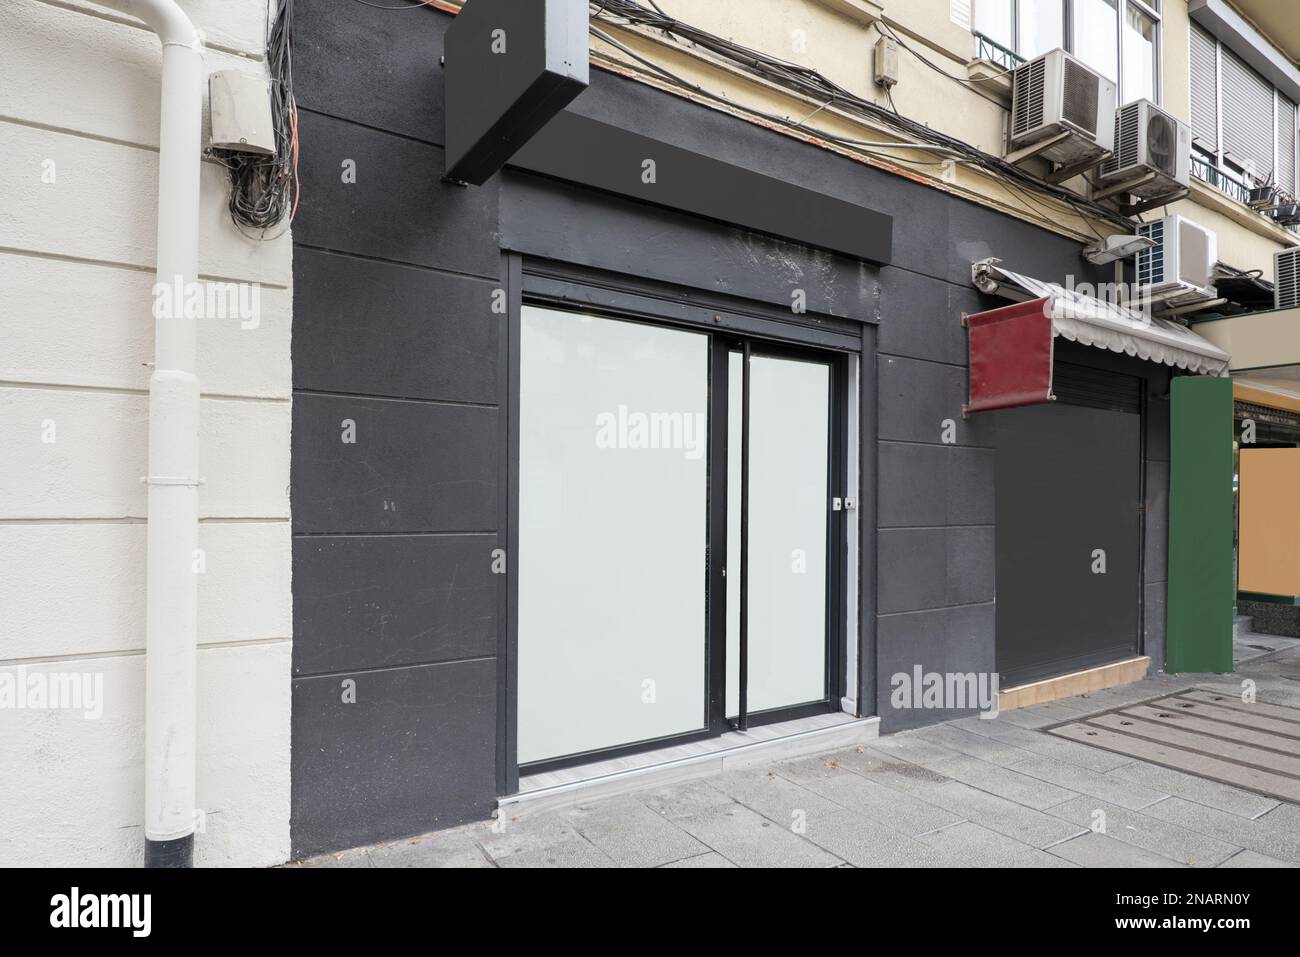 Local at street level in an old building with a black painted facade, opaque windows and metal shutter closure Stock Photo